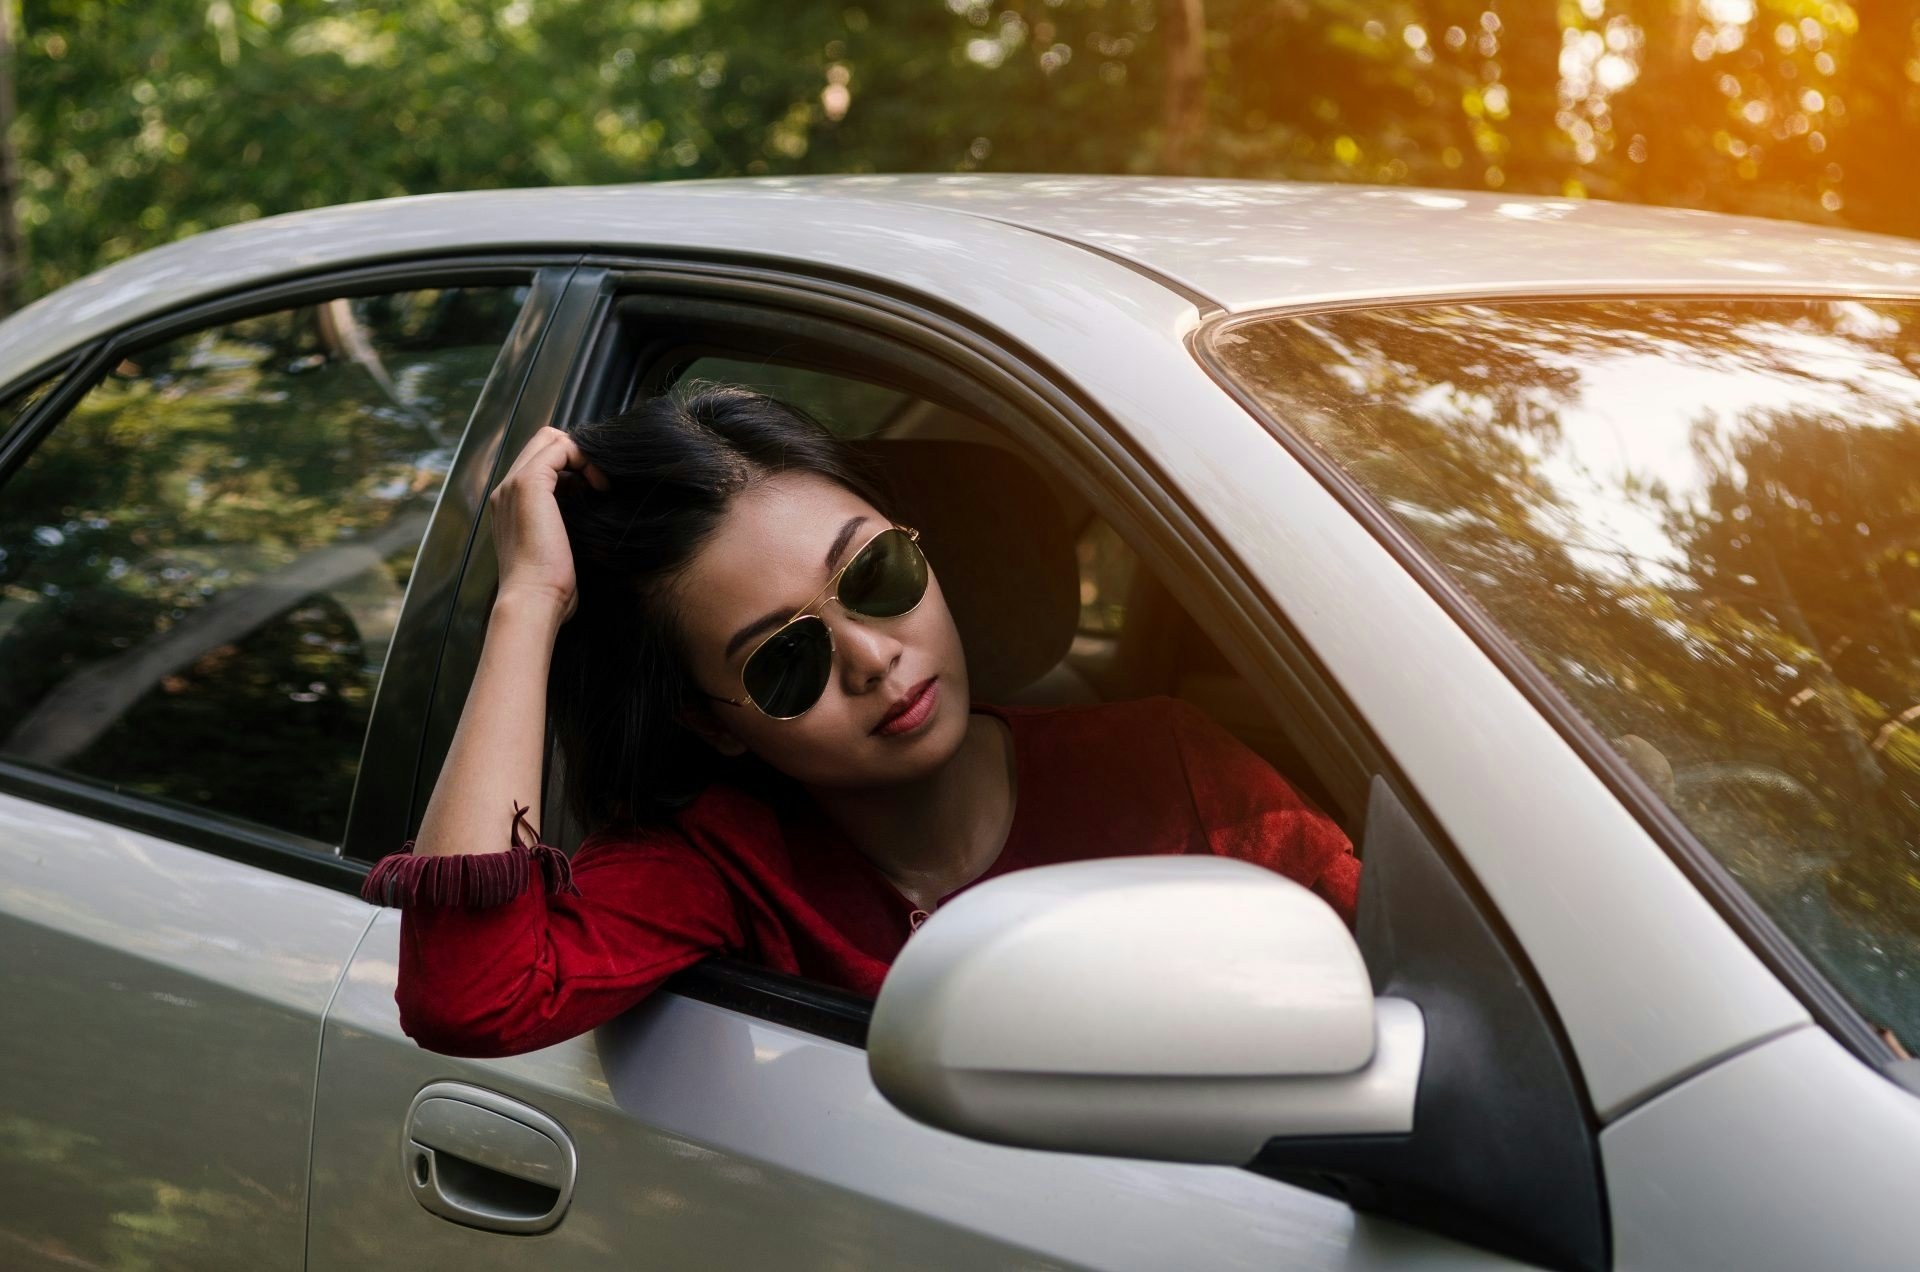 For Chinese travelers, self-drive tourism allows both full flexibility and a packed itinerary. (Shutterstock)